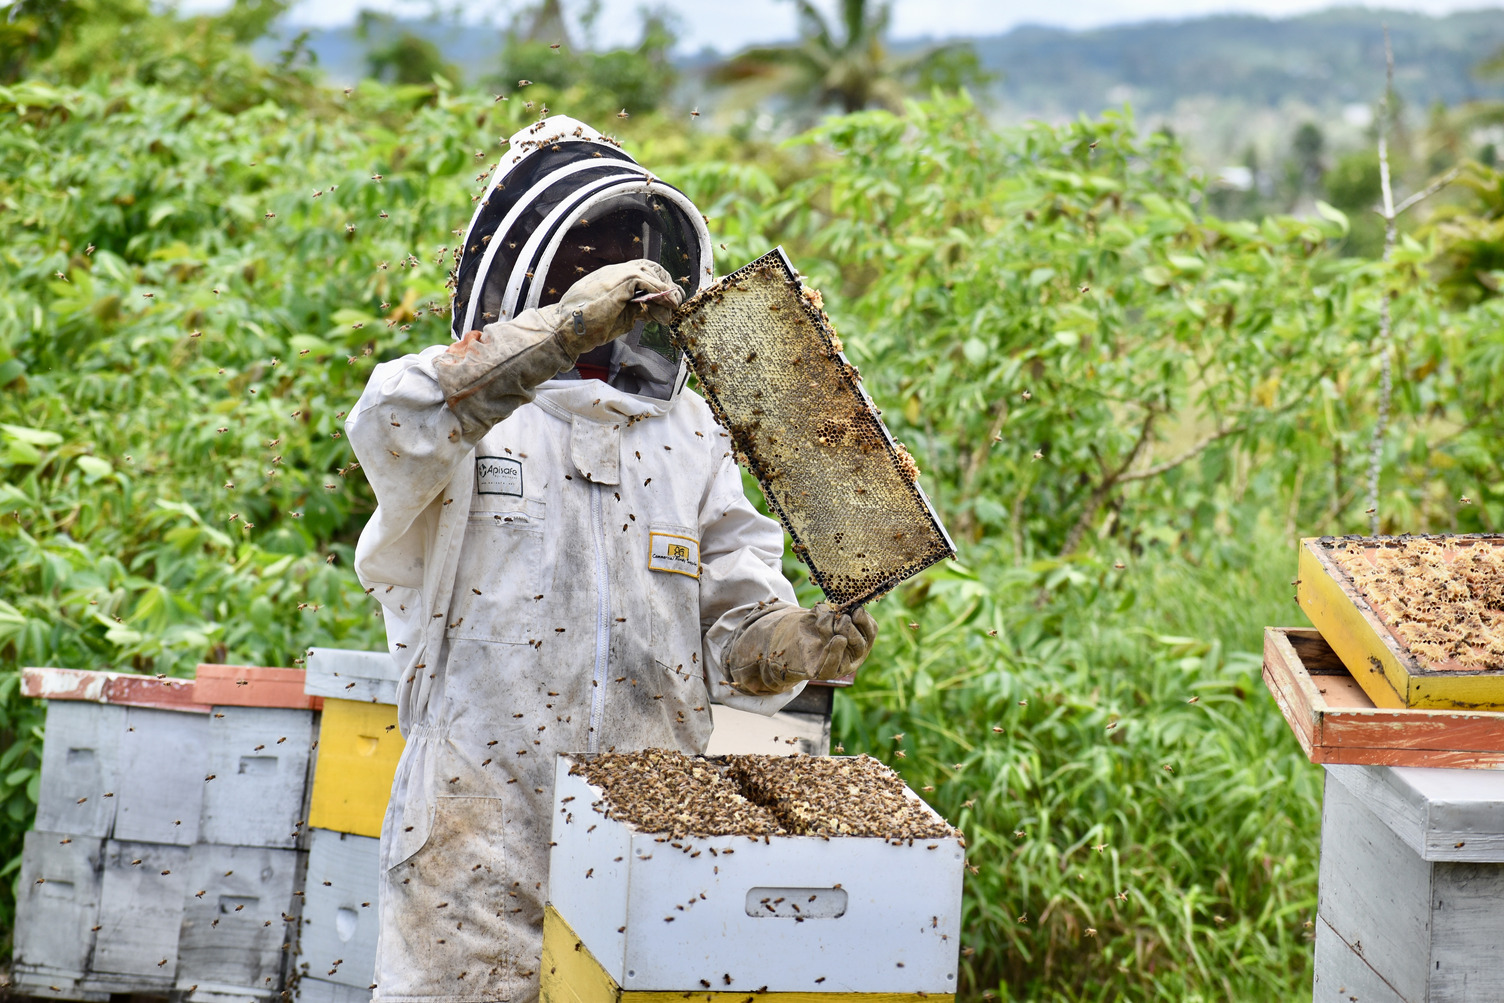 Enterprises based on beekeeping offer many opportunities for smallholder farmers. In Fiji there is strong domestic demand for honey with potential for the export of honey and beeswax. In Nasinu, Tilapia farmer, Ms Katalina Baleisuva has ventured to bee keeping and she says this has improved her finances.